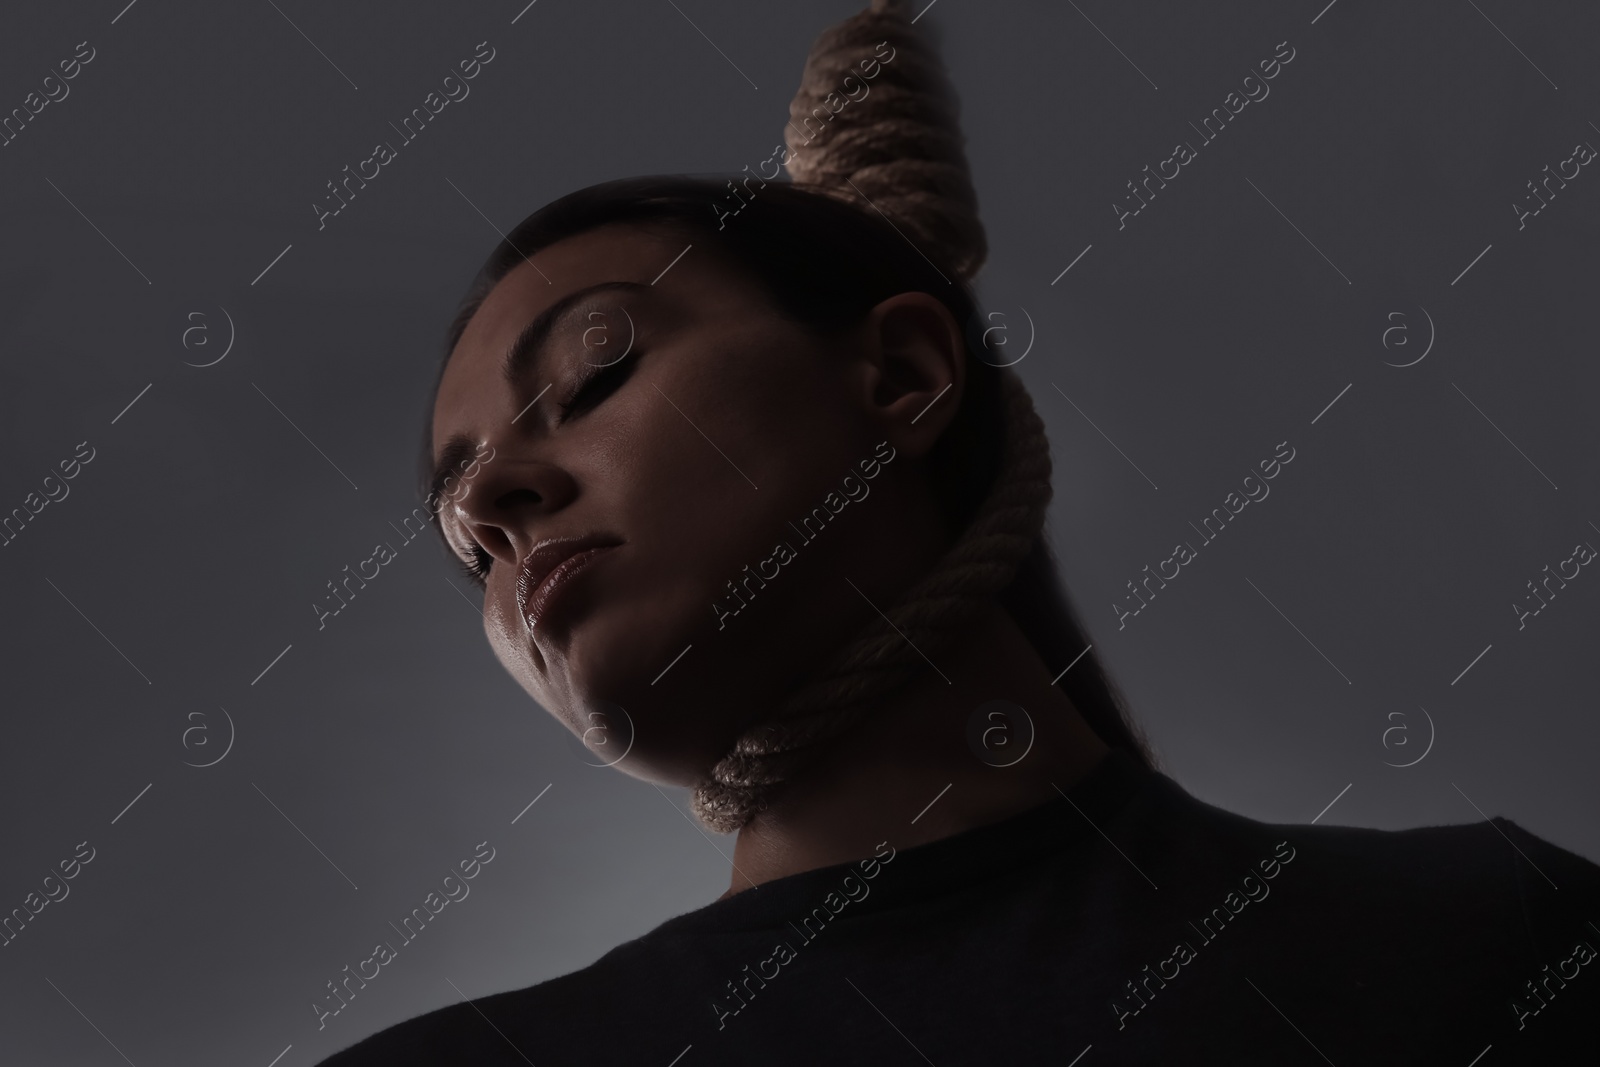 Photo of Depressed woman with rope noose on neck against grey background, low angle view